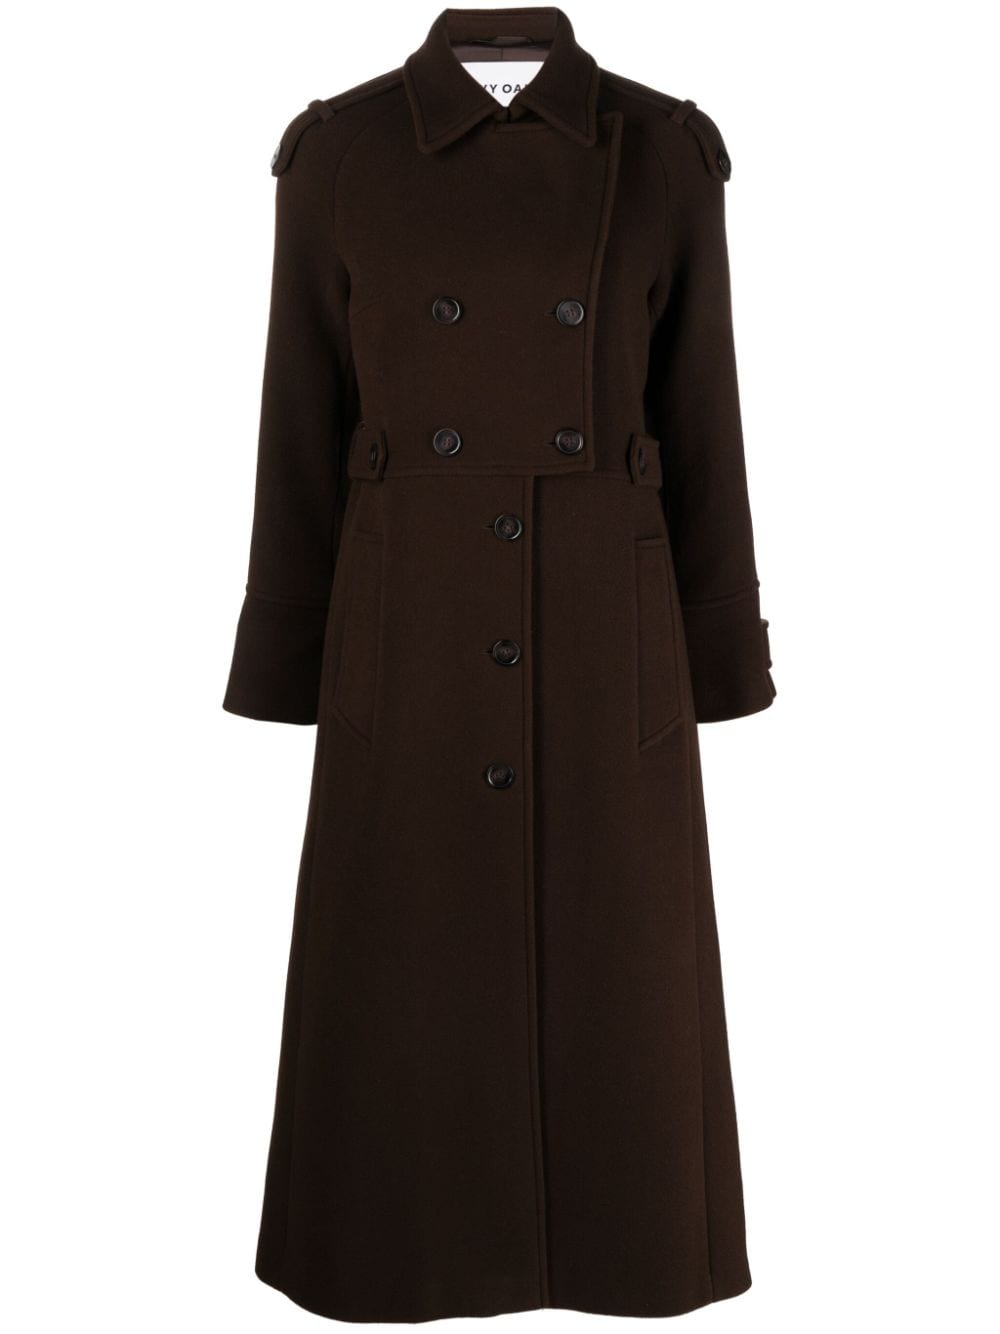 IVY OAK double-breasted notched coat - Brown von IVY OAK